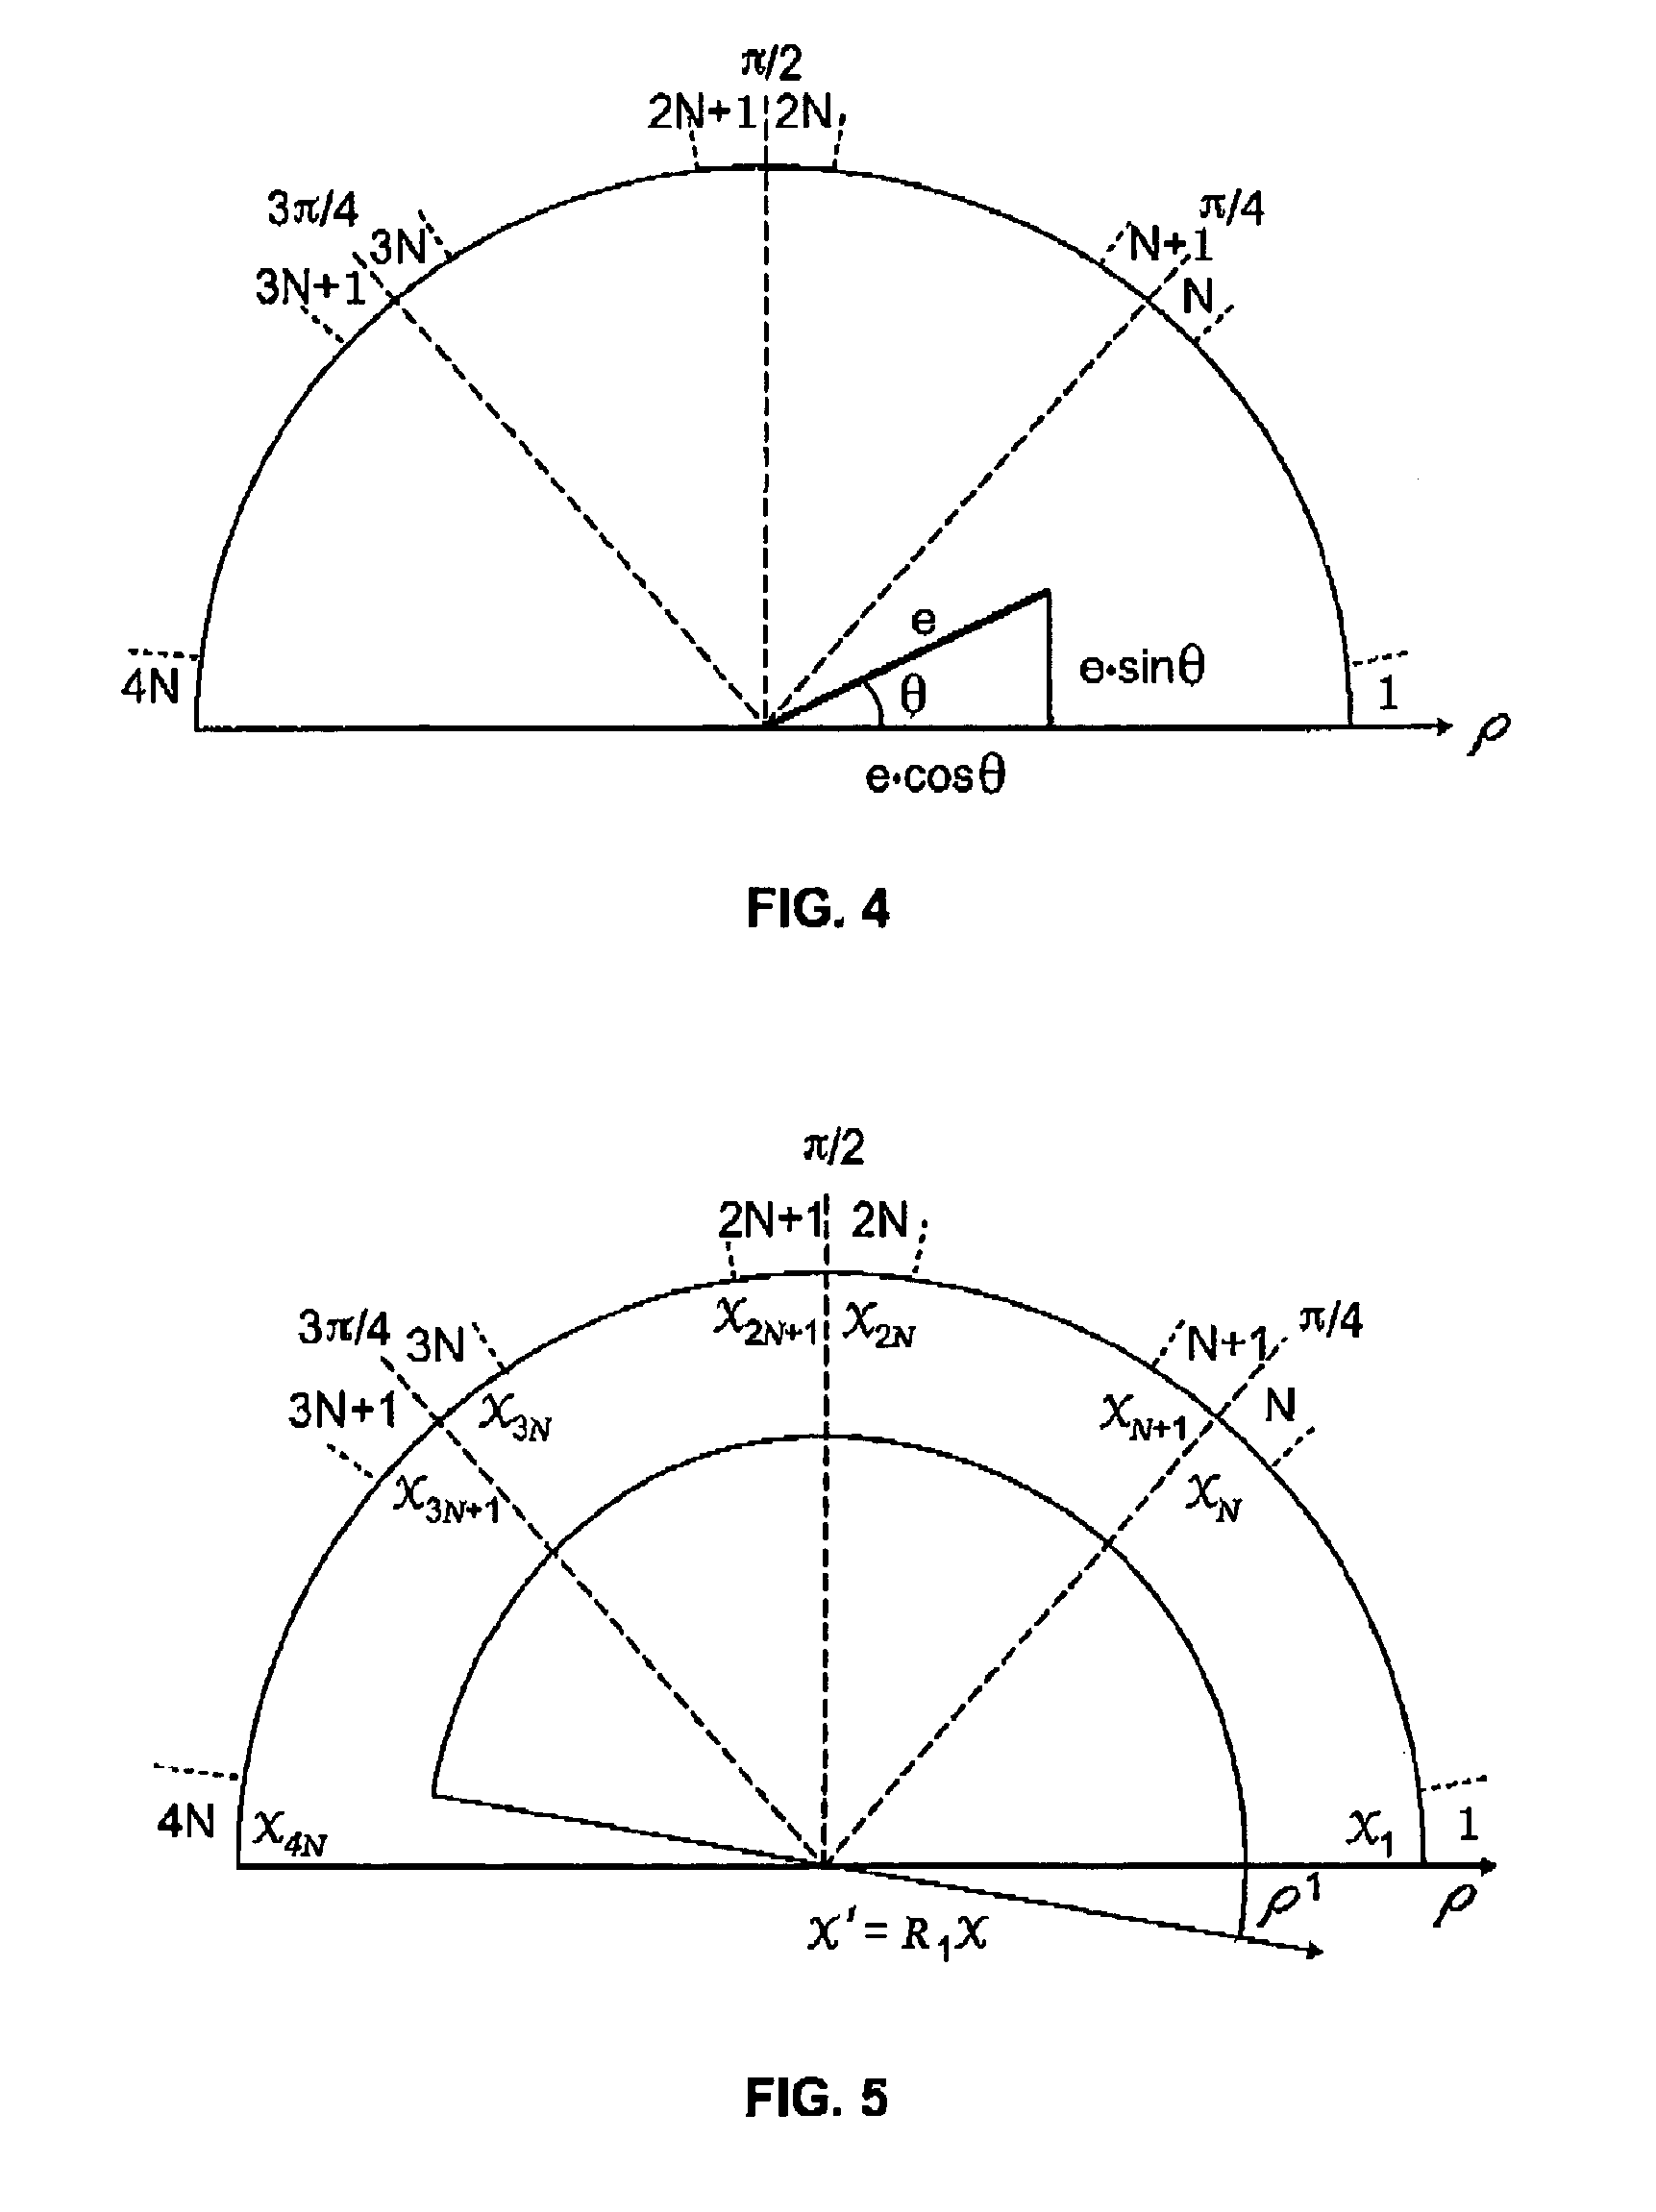 System and methods for using a dynamic scheme for radiosurgery